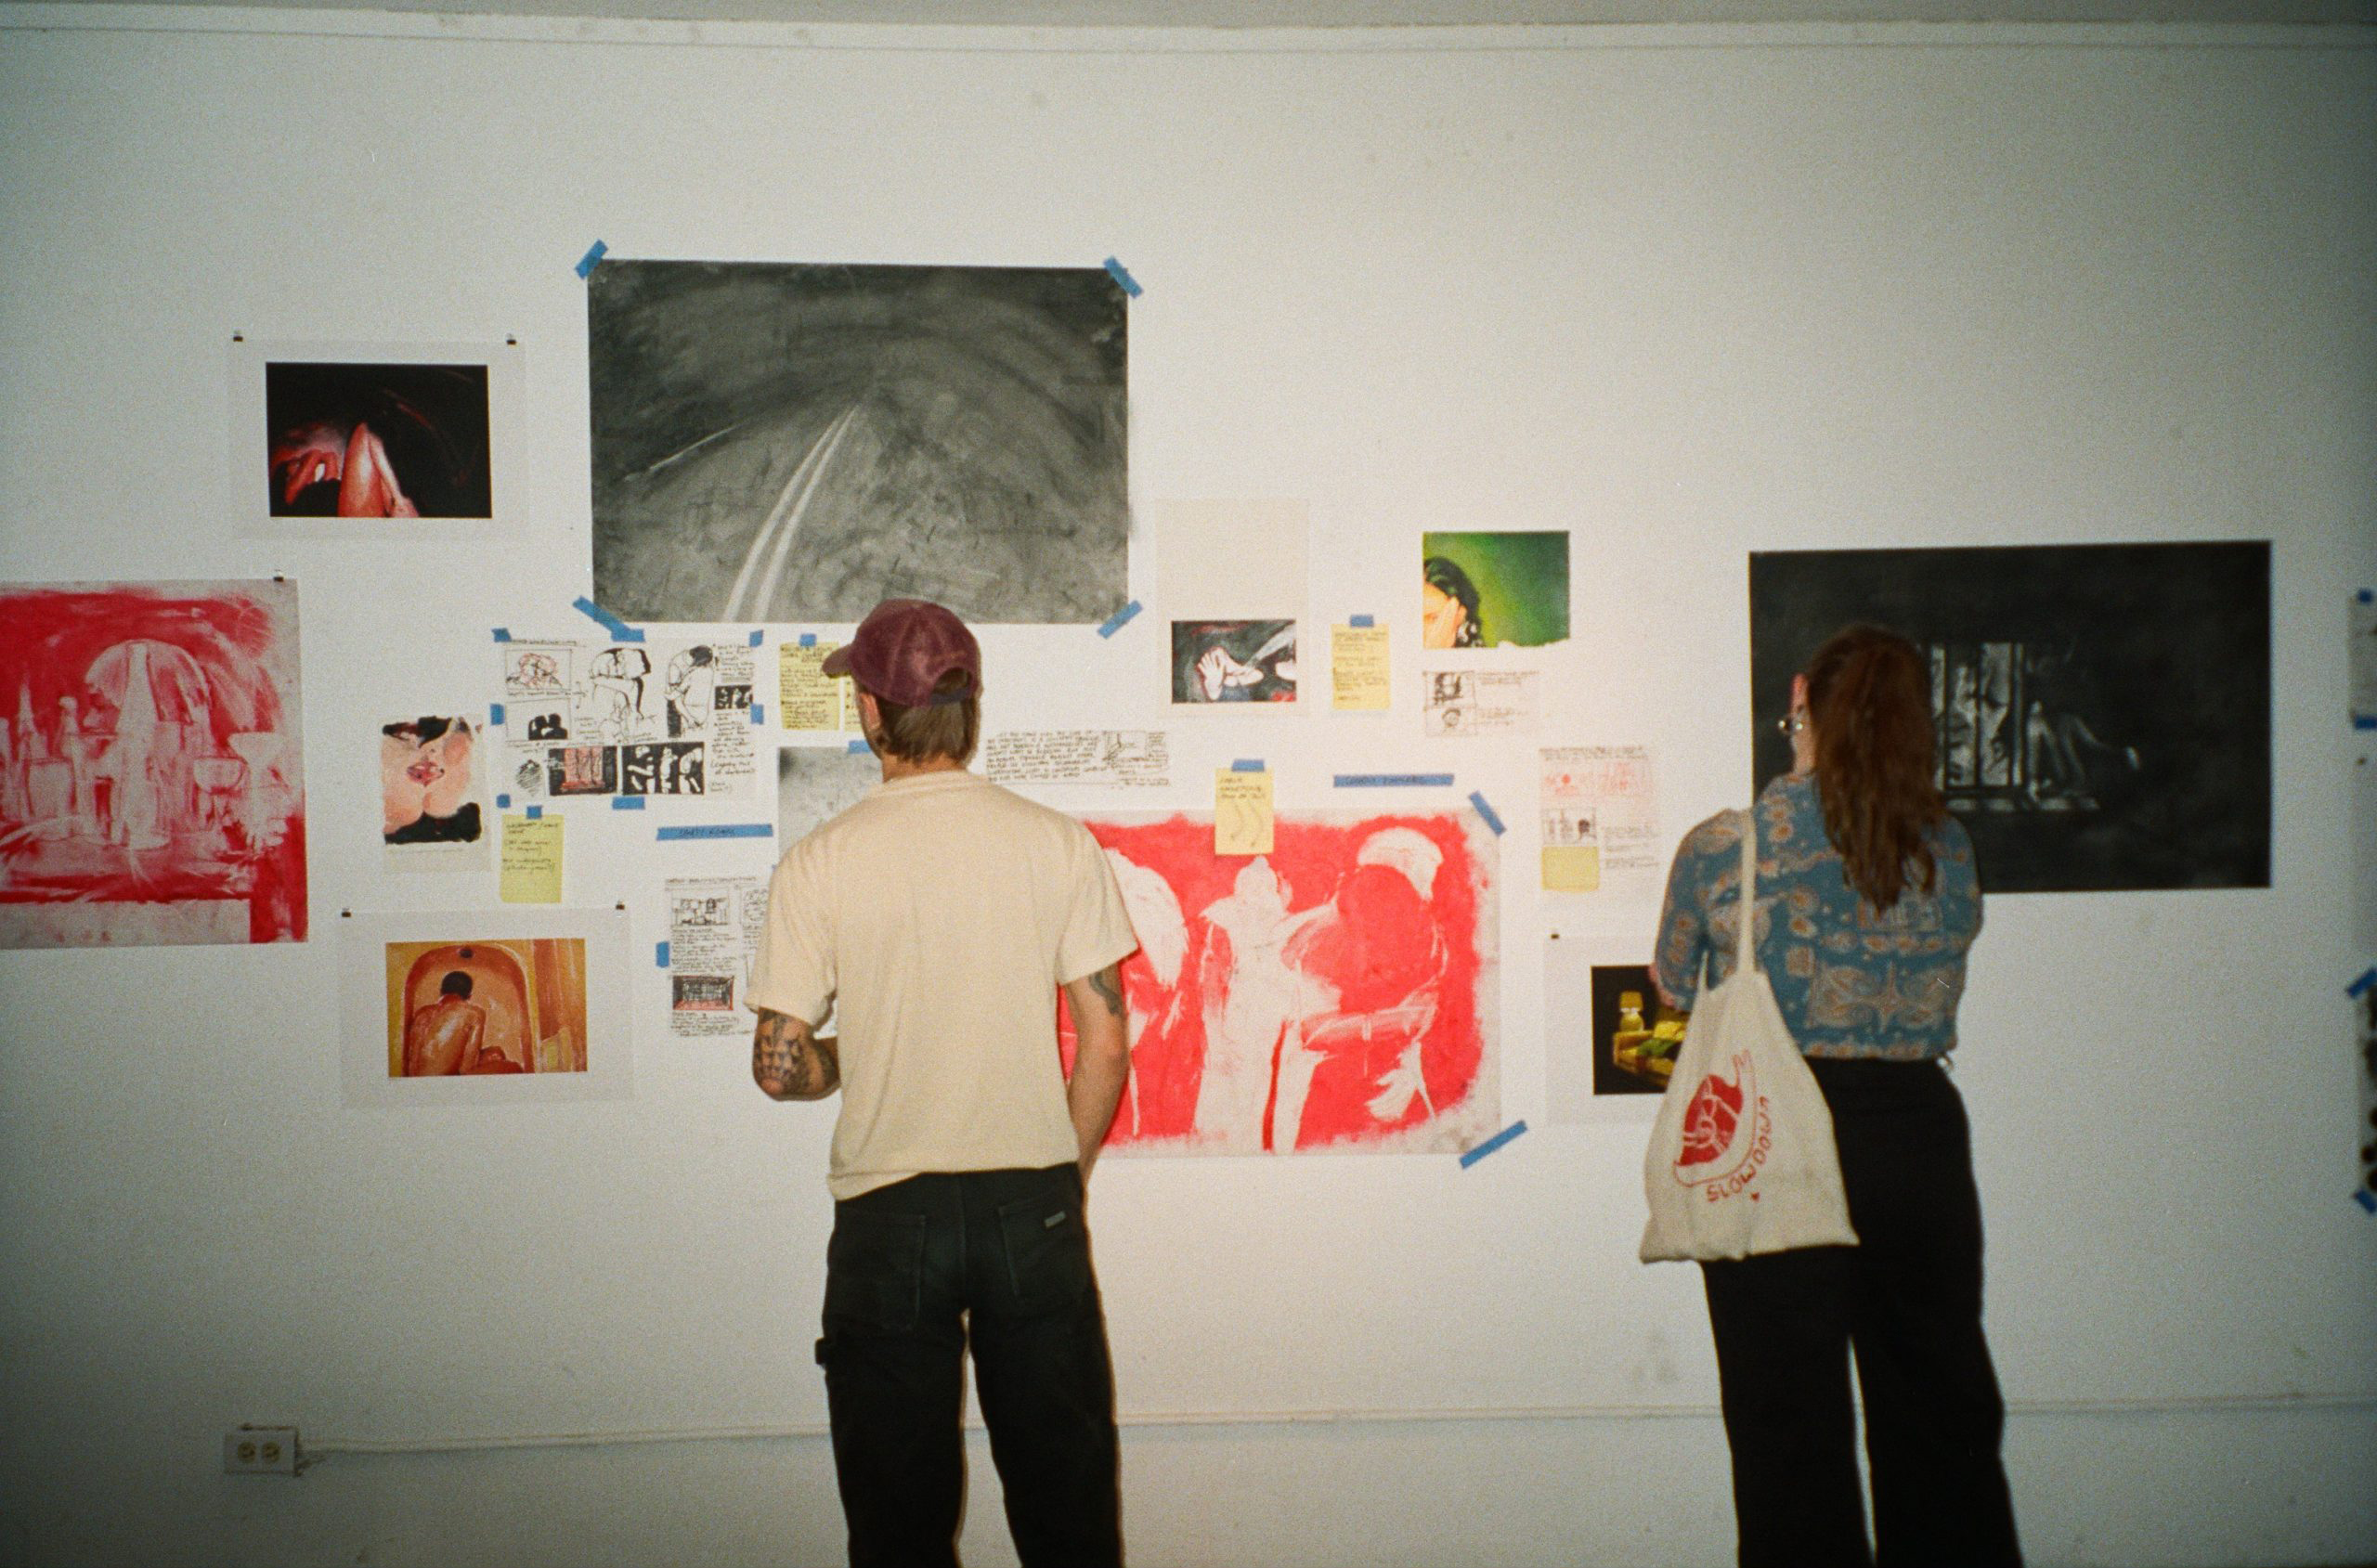 Visitors looking at visual artist Alissa Zilber’s drawings and paintings during her open studio exhibition at the Ministry of Casual Living in Victoria, British Columbia.